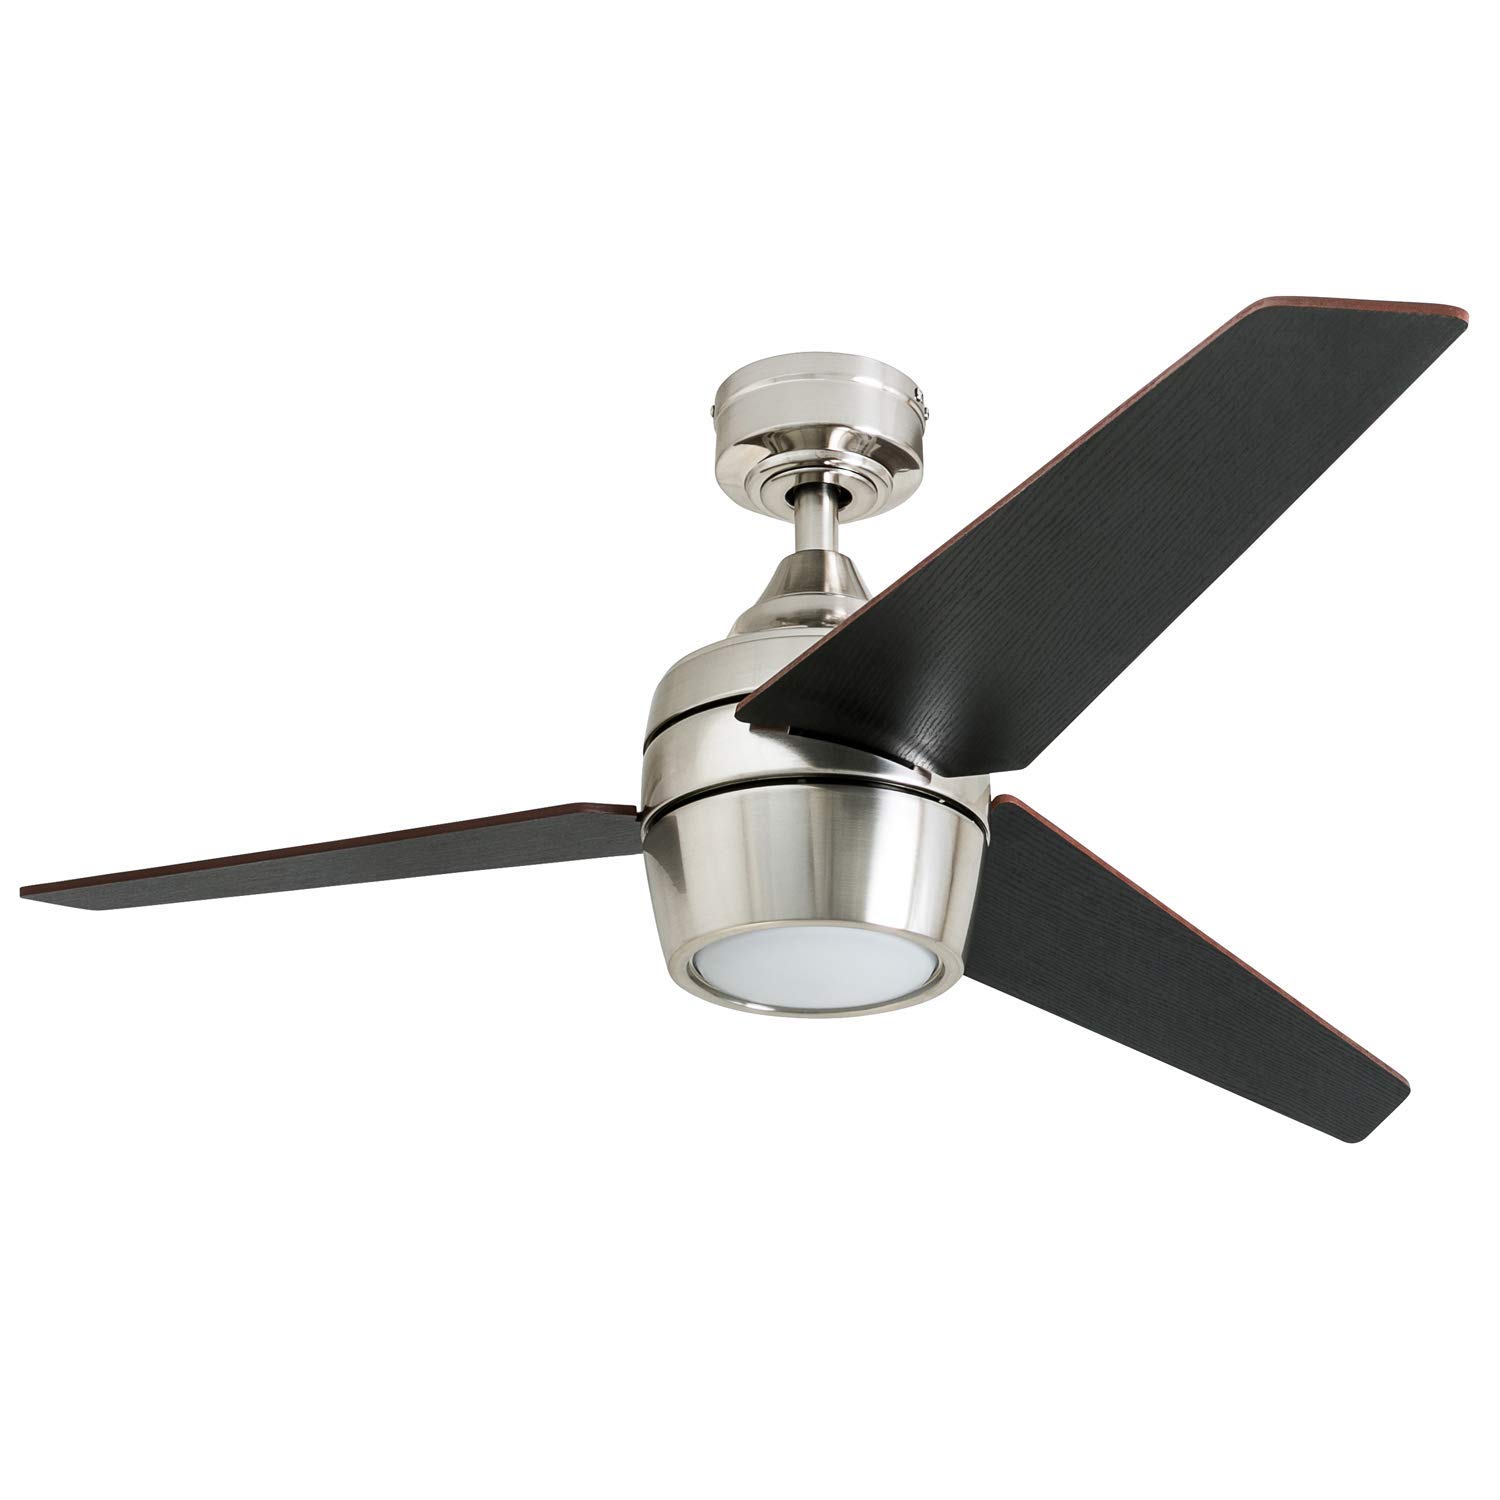 Honeywell Ceiling Fans Eamon, 52 Inch Modern Indoor LED Ceiling Fan with Light, Remote Control, Three Mounting Options, 3 Dual Finish Blades, Reversible Motor - 50604-01 (Brushed Nickel)